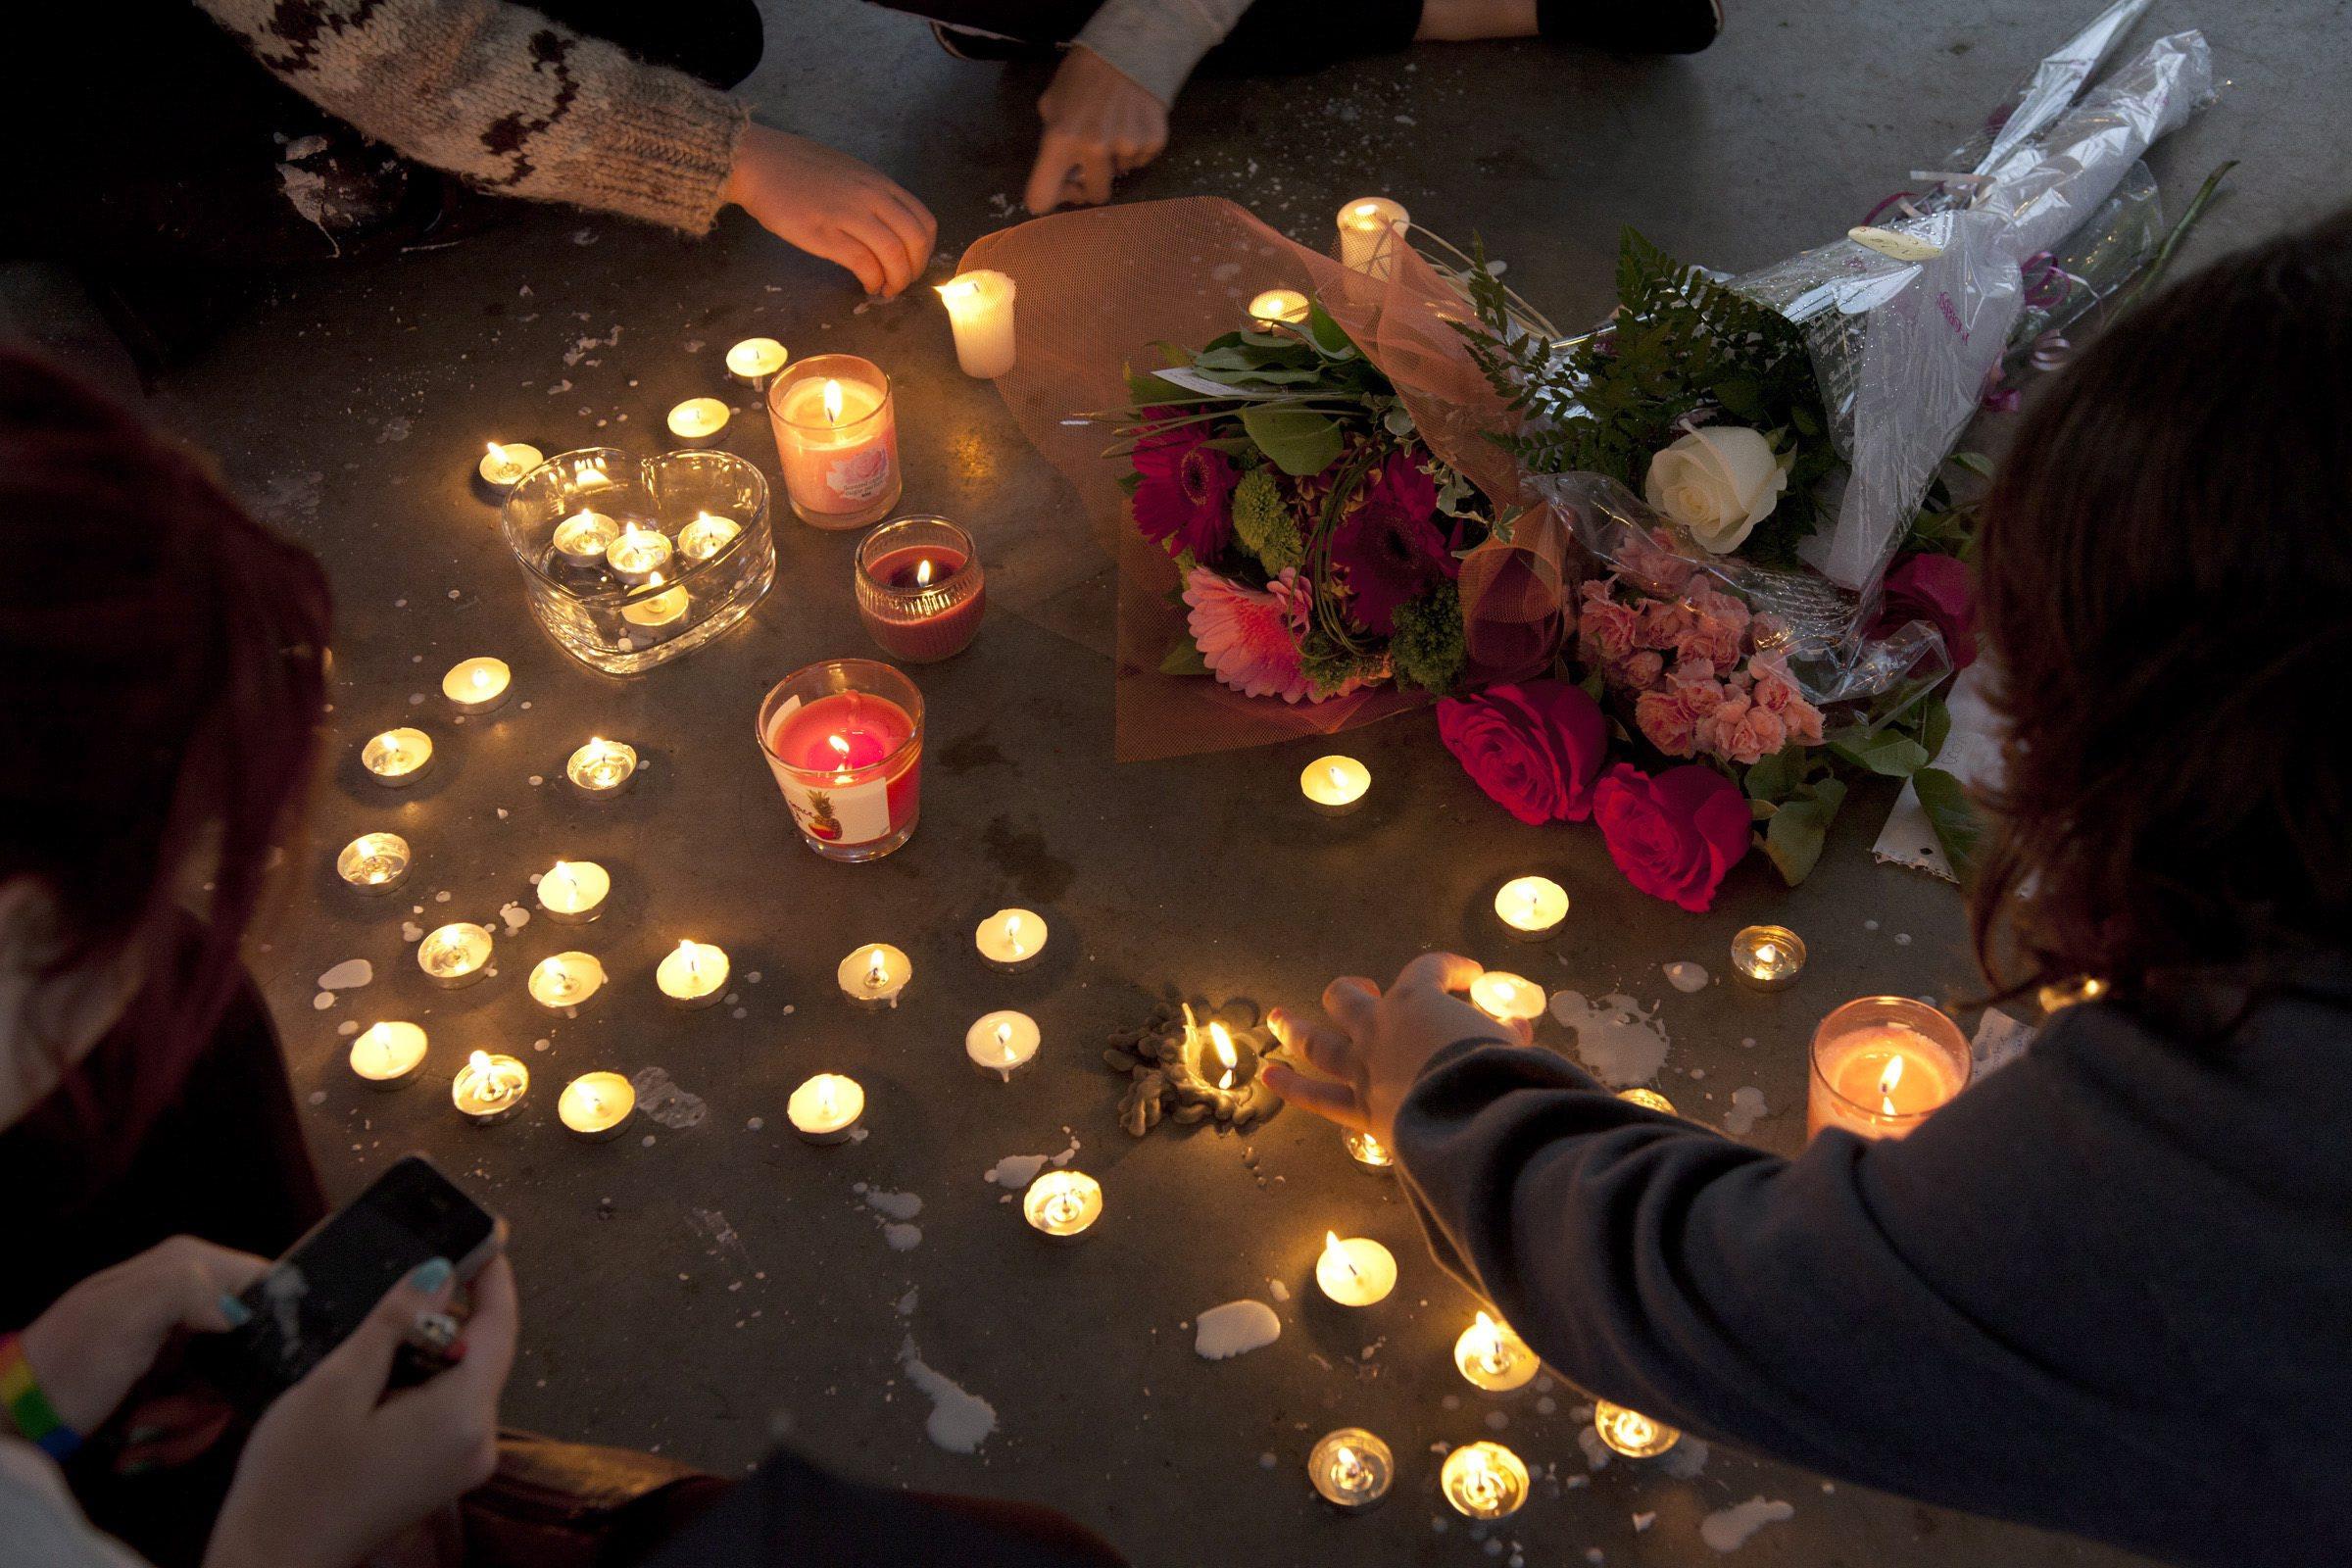 People gather at a memorial in the Canadian city of Maple Ridge, British Columbia, honouring teenager Amanda Todd in October 2012. Todd took her own life following a cyberbullying and sexual extortion campaign by Aydin Coban. Photo: AP/The Canadian Press